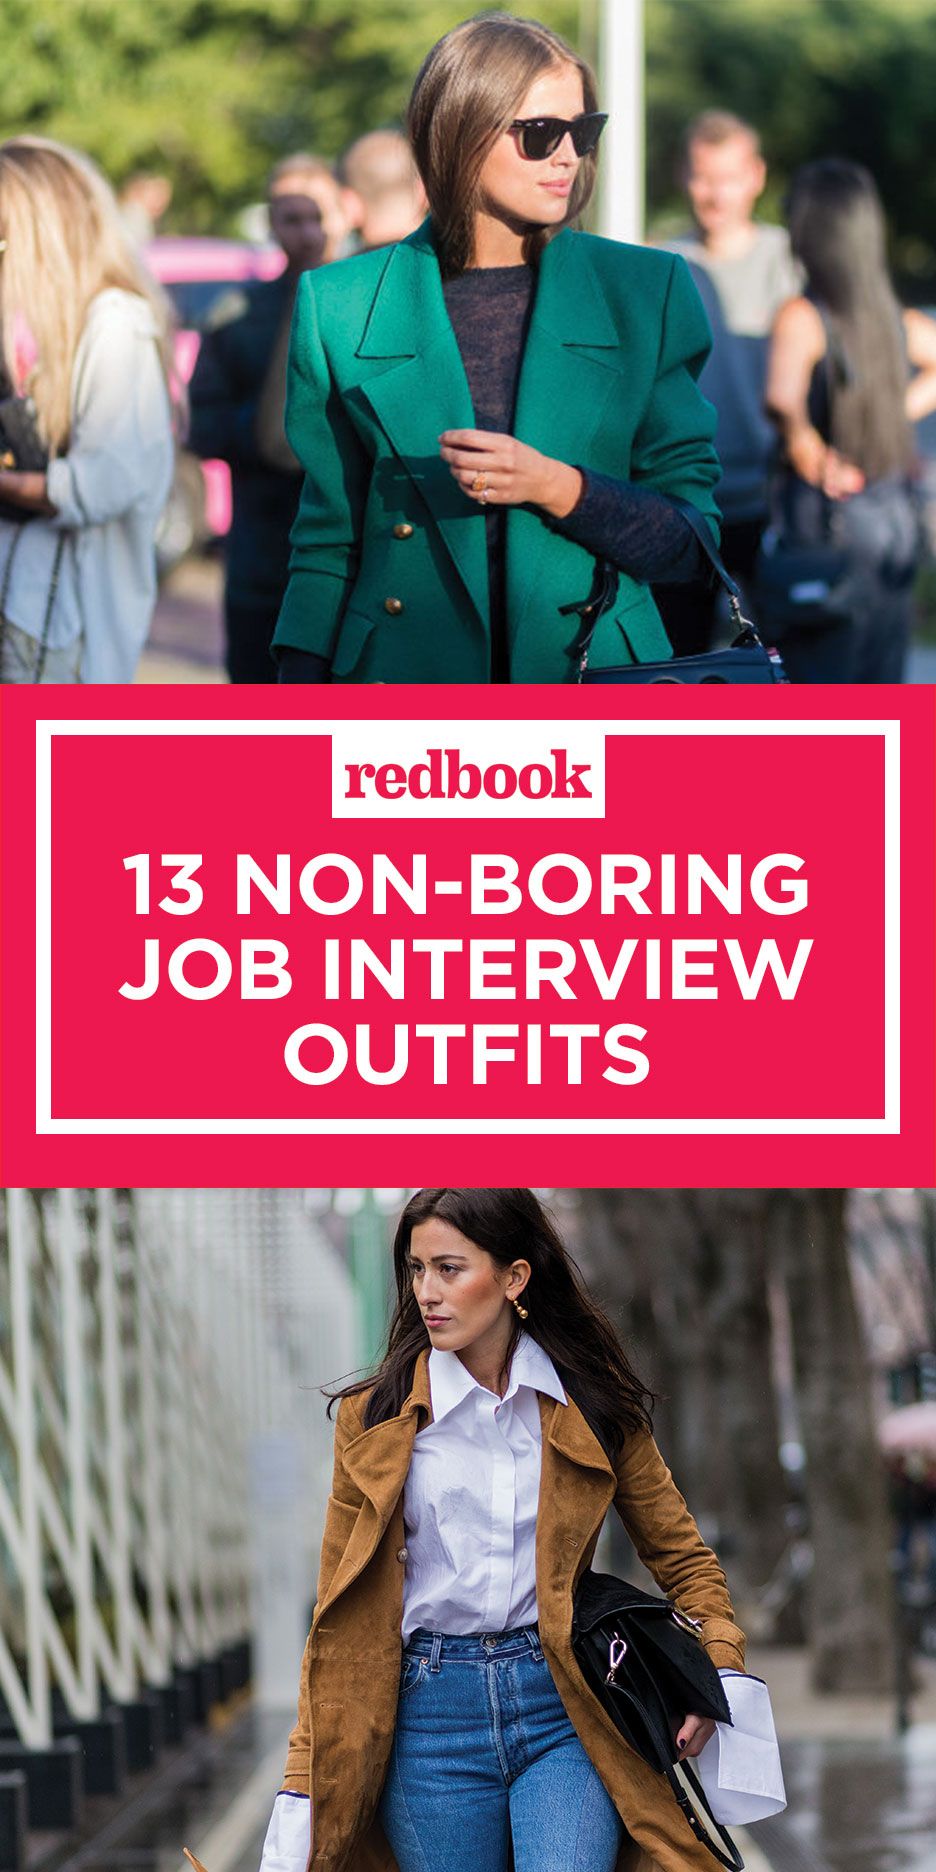 Job interview outfits for women, Interview outfits women, Job